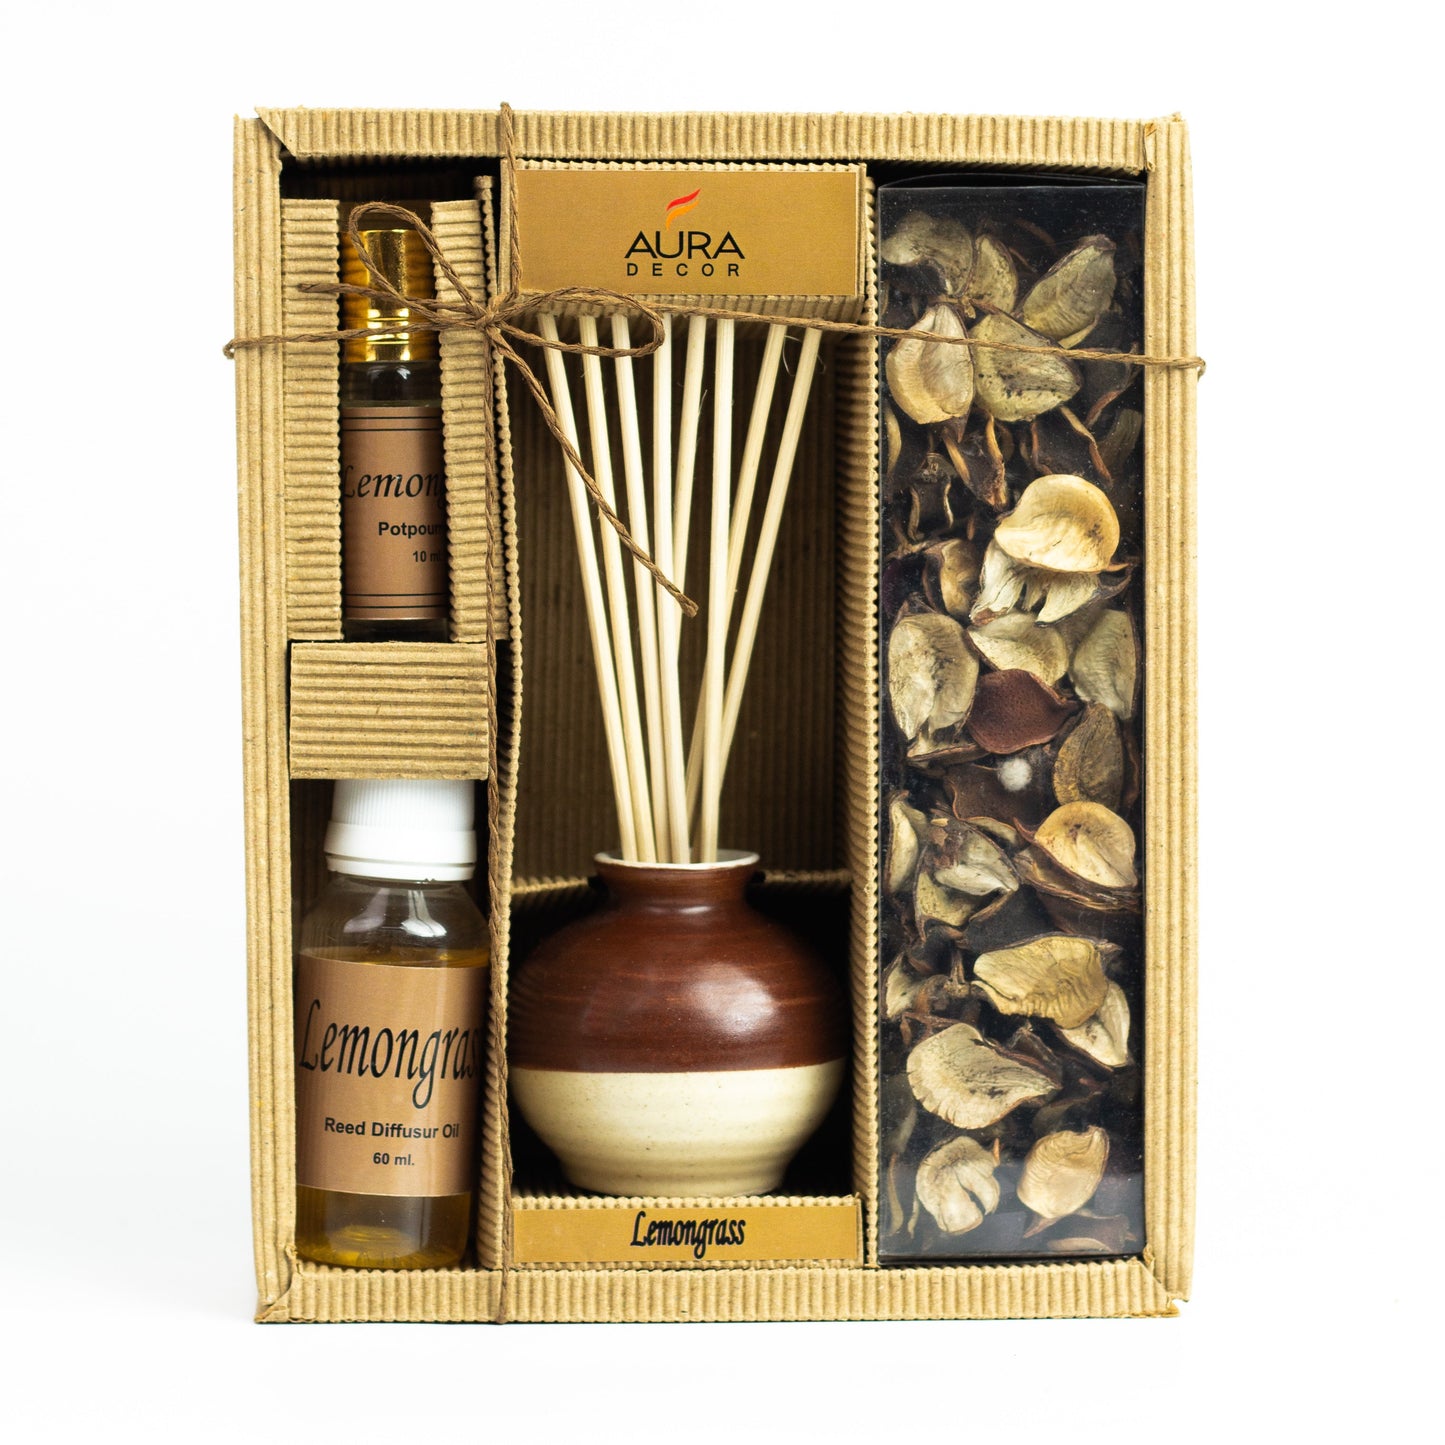 Auradecor Reed Diffuser Gift Set with Potpourri ( RD10)